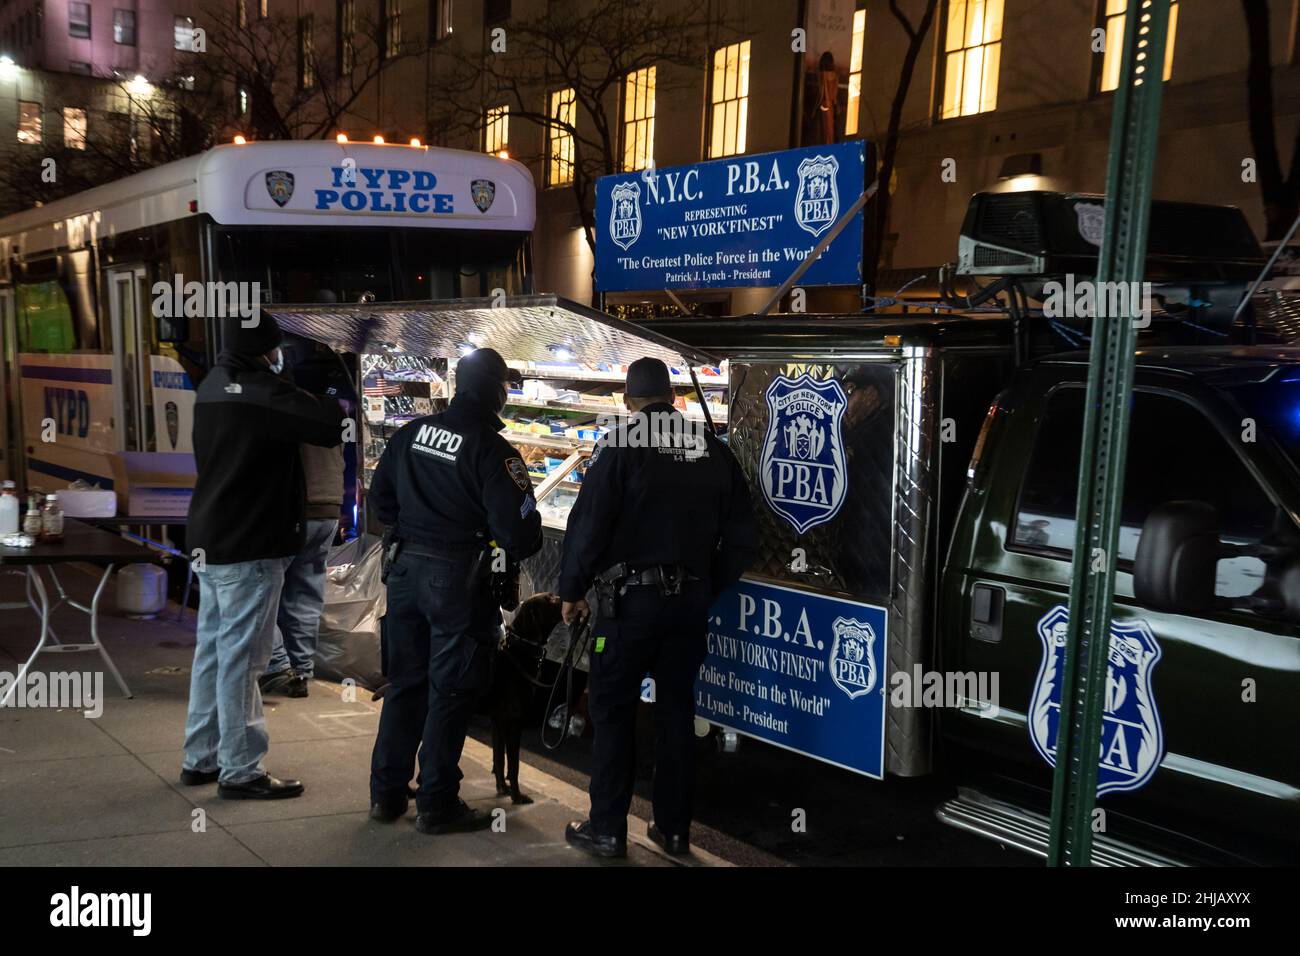 N.Y.C. P.B.A. food truck catering to Police Officers seen outside Saint Patrick's Cathedral during a wake for New York police officer Jason Rivera  in New York City.NYPD Police Officer Jason Rivera was killed by gunman on January 21, 2022 while responding to a domestic dispute call. (Photo by Ron Adar / SOPA Images/Sipa USA) Stock Photo